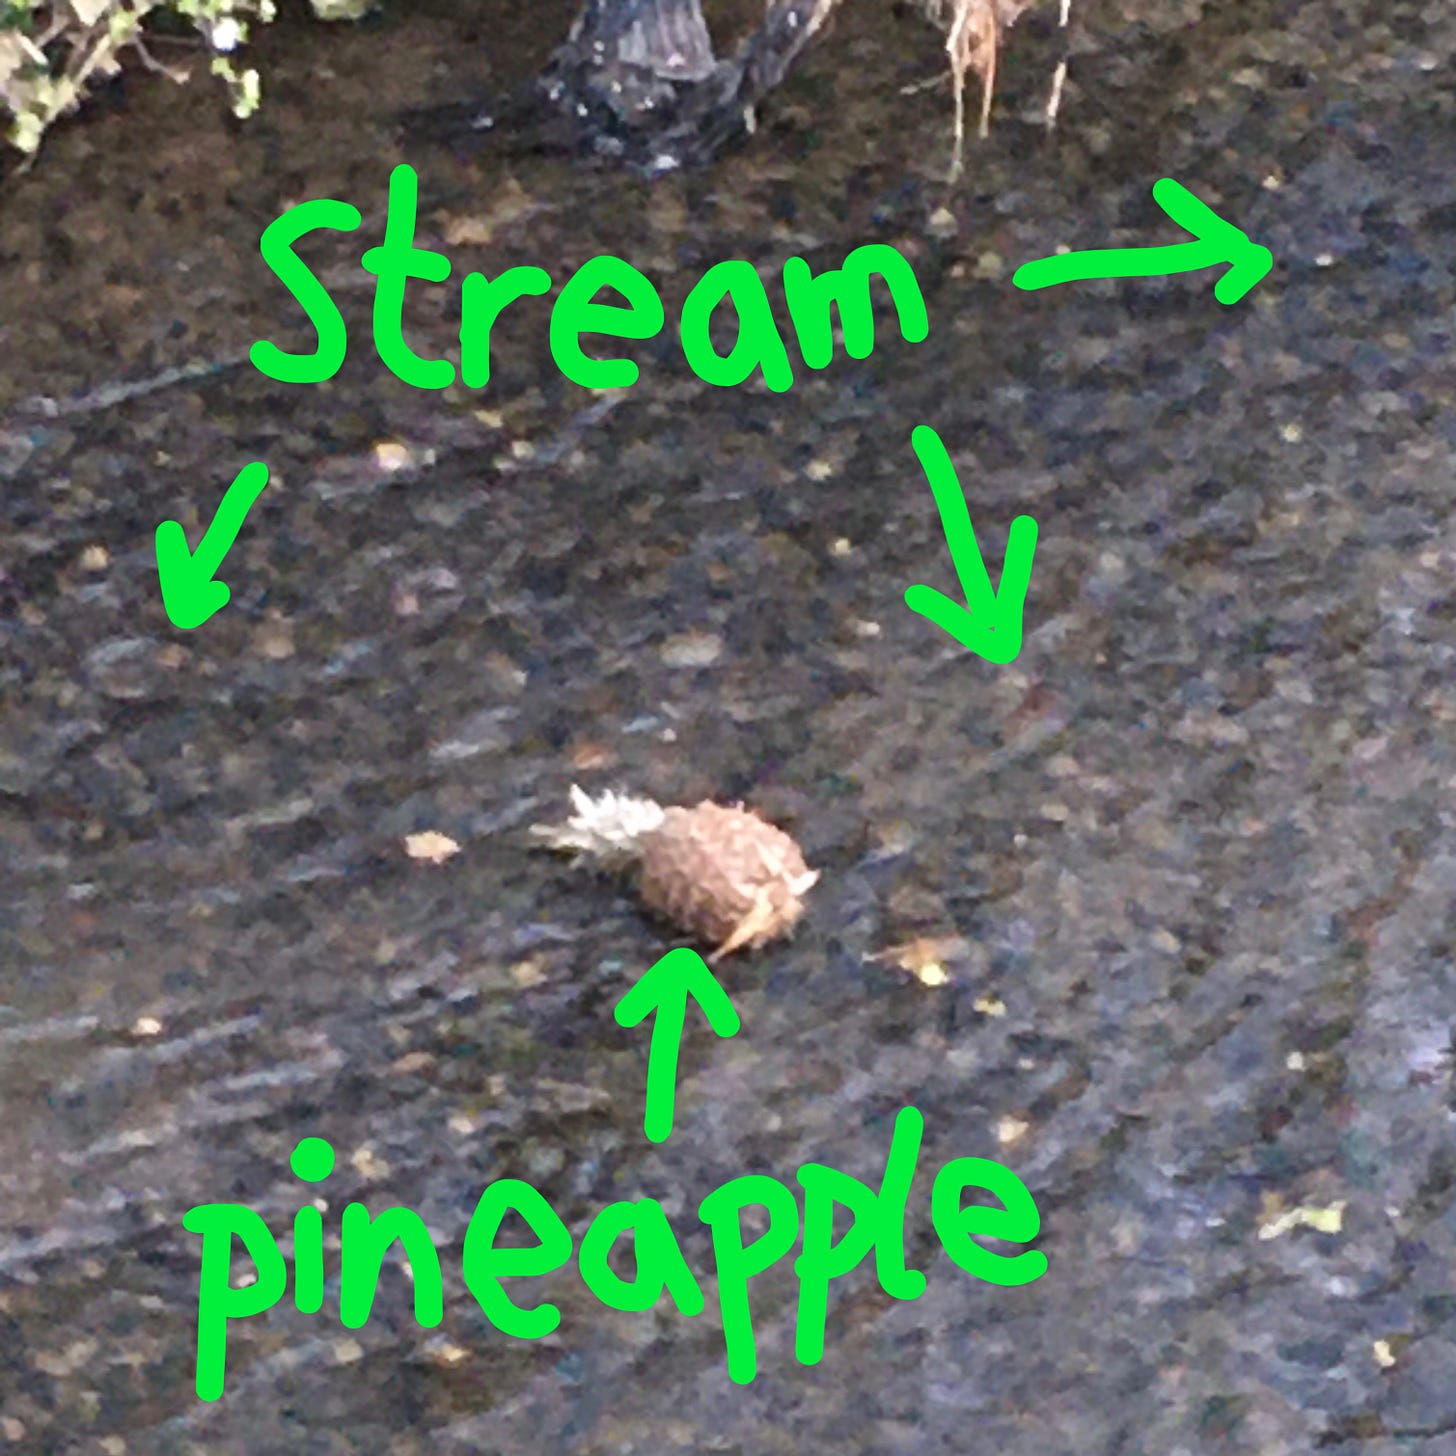 annotated photo of a pineapple in a stream